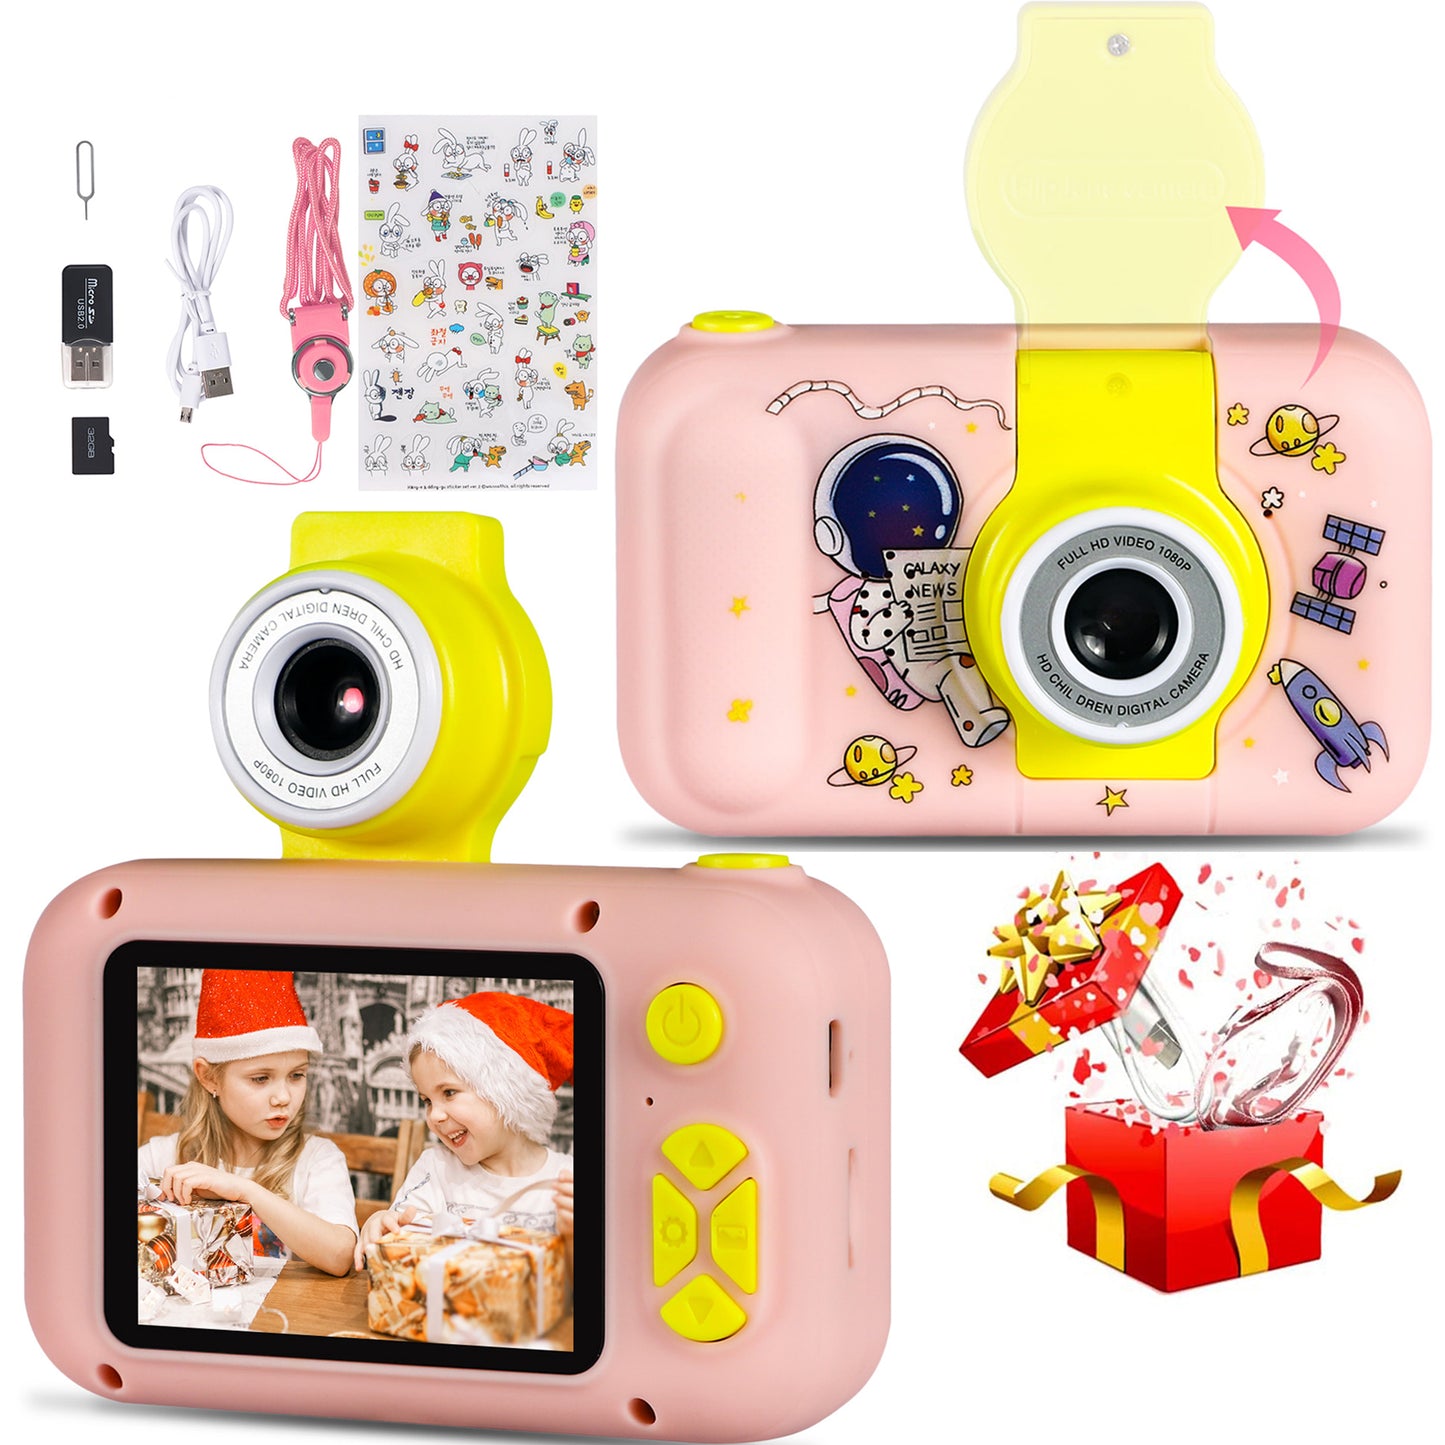 Reversible Kids Camera, 1080P Upgrade Selfie Camera with 32 GB Card, Kids Digital Camera for Girls Boys 3-8 Year Old, Perfect Christmas Birthday Festival Toys Gifts for Toddlers, Pink Astronaut